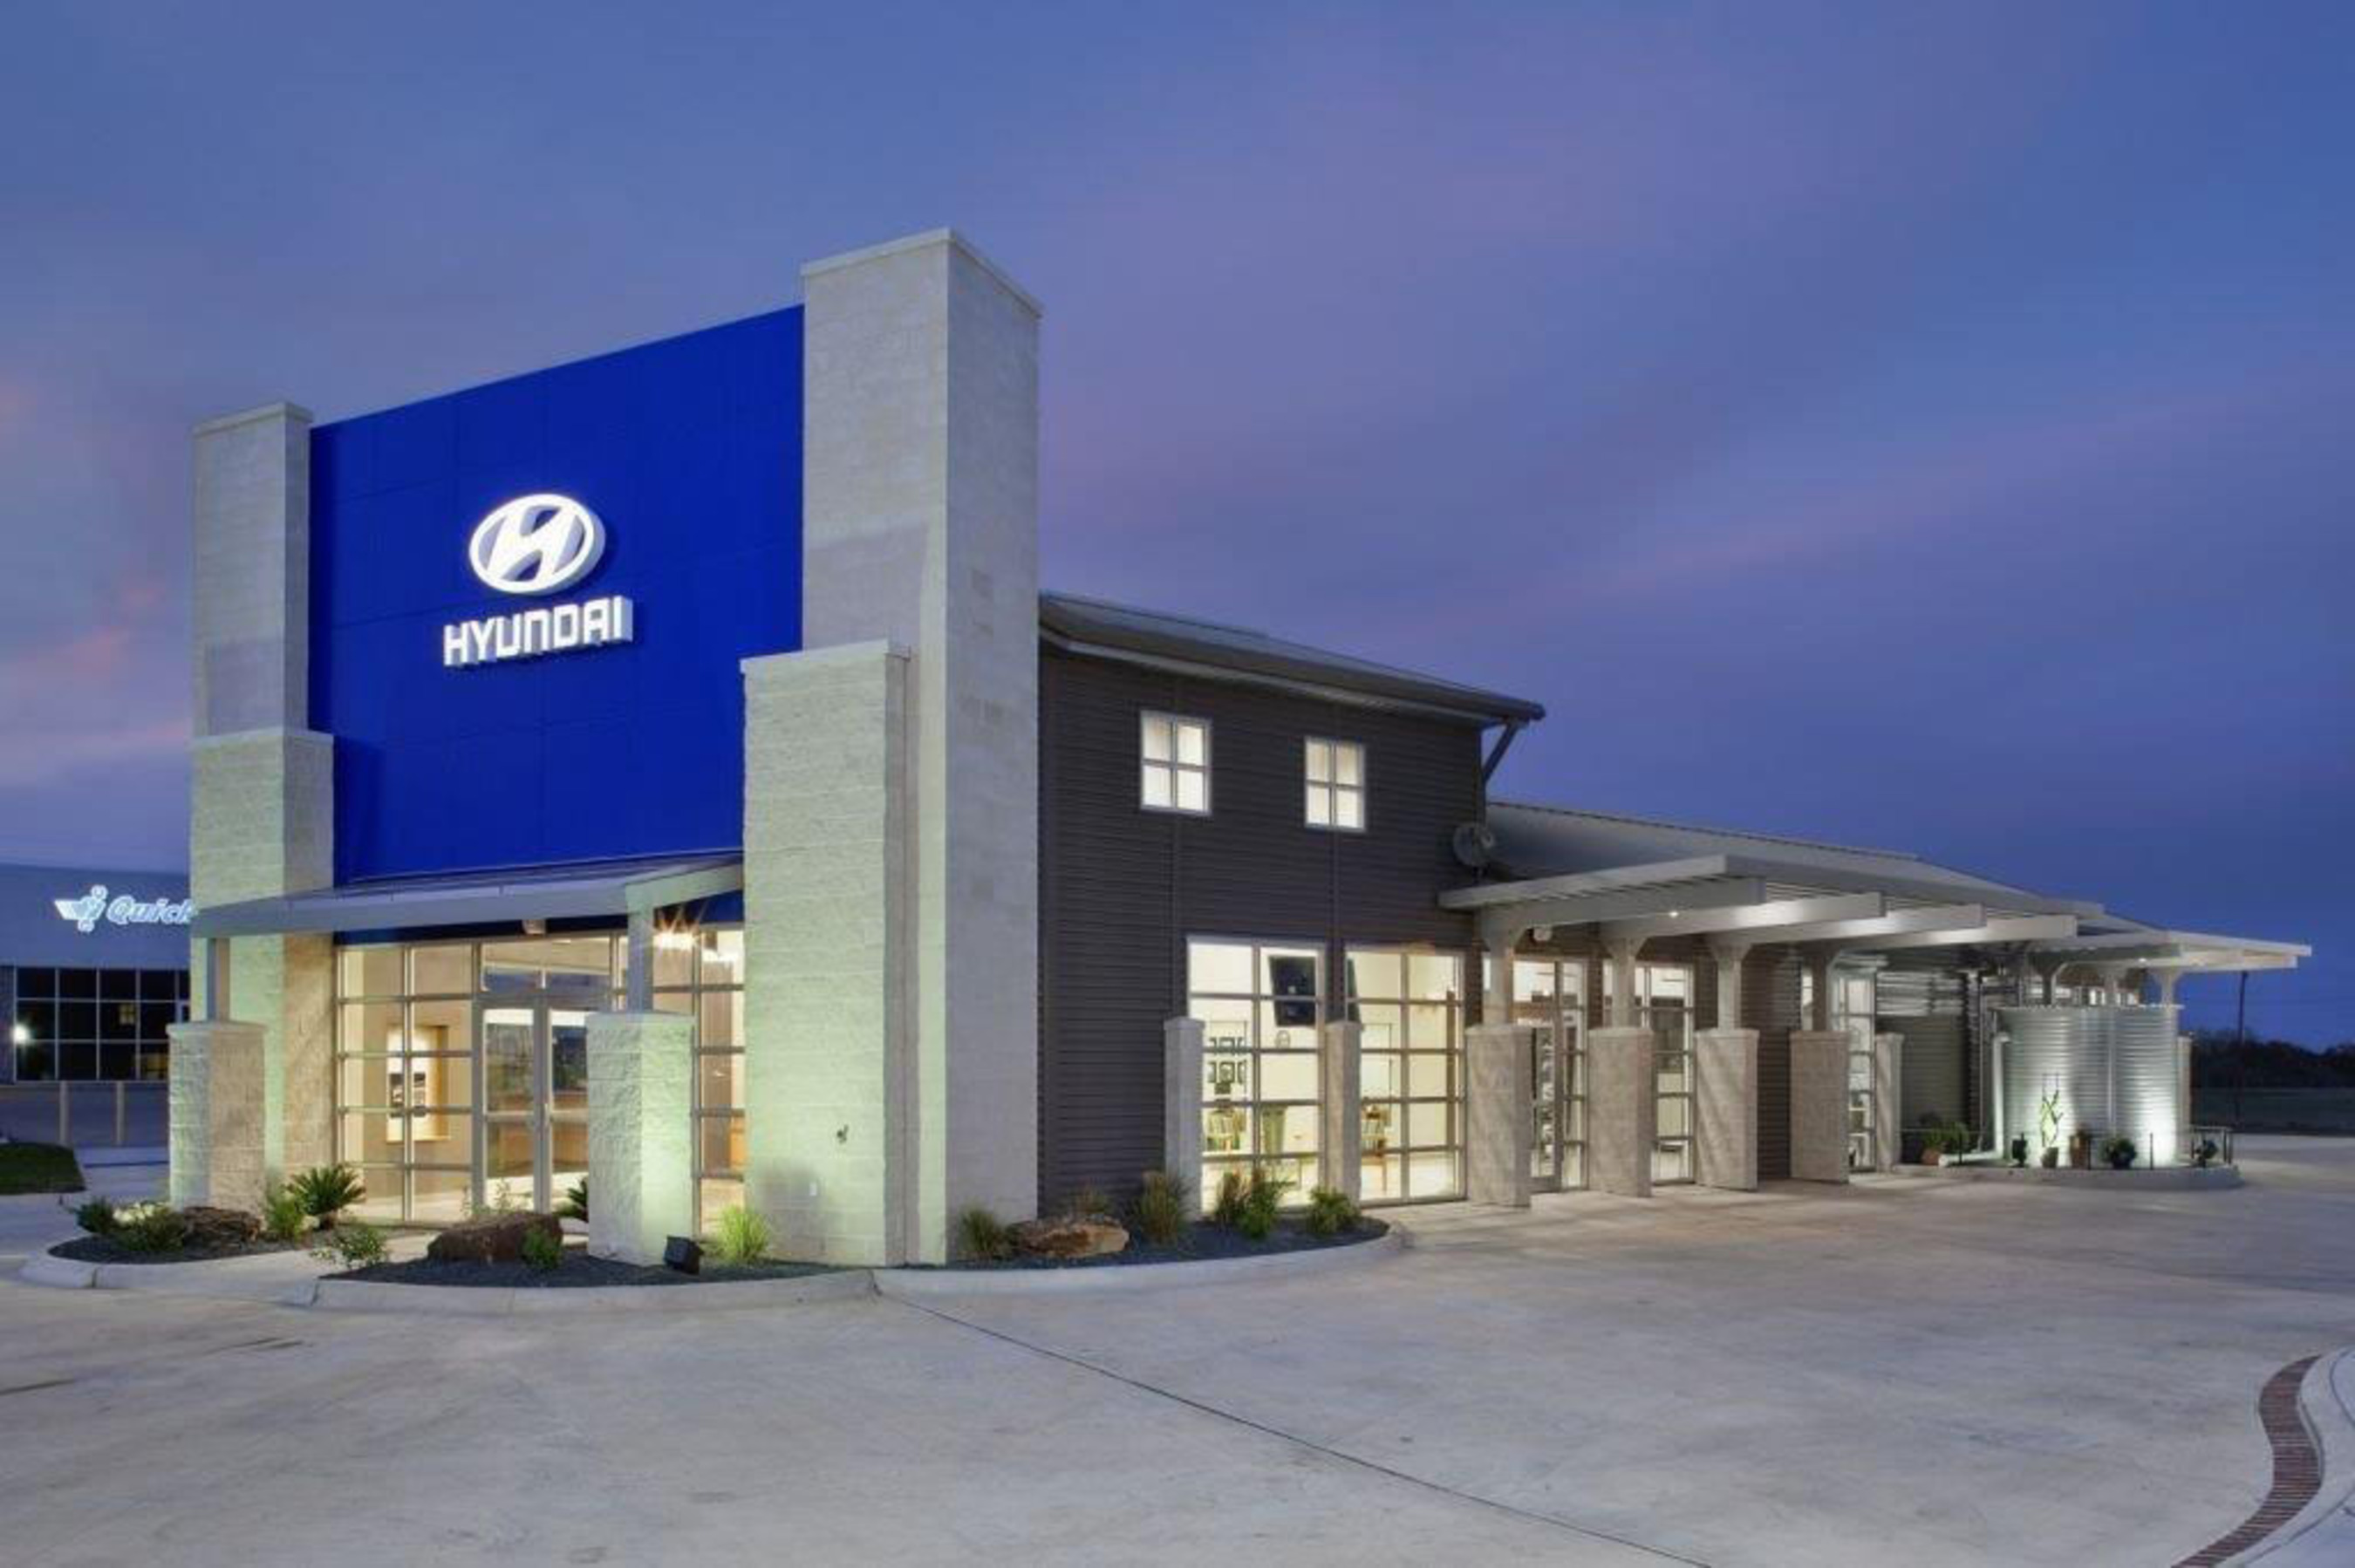 Hyundai of Brenham's exterior shows the extensive use of recycled materials used during construction. The water collection and recycling system can be seen near the rear of the building on the right. (PRNewsFoto/Hyundai Motor America) (PRNewsFoto/HYUNDAI MOTOR AMERICA)